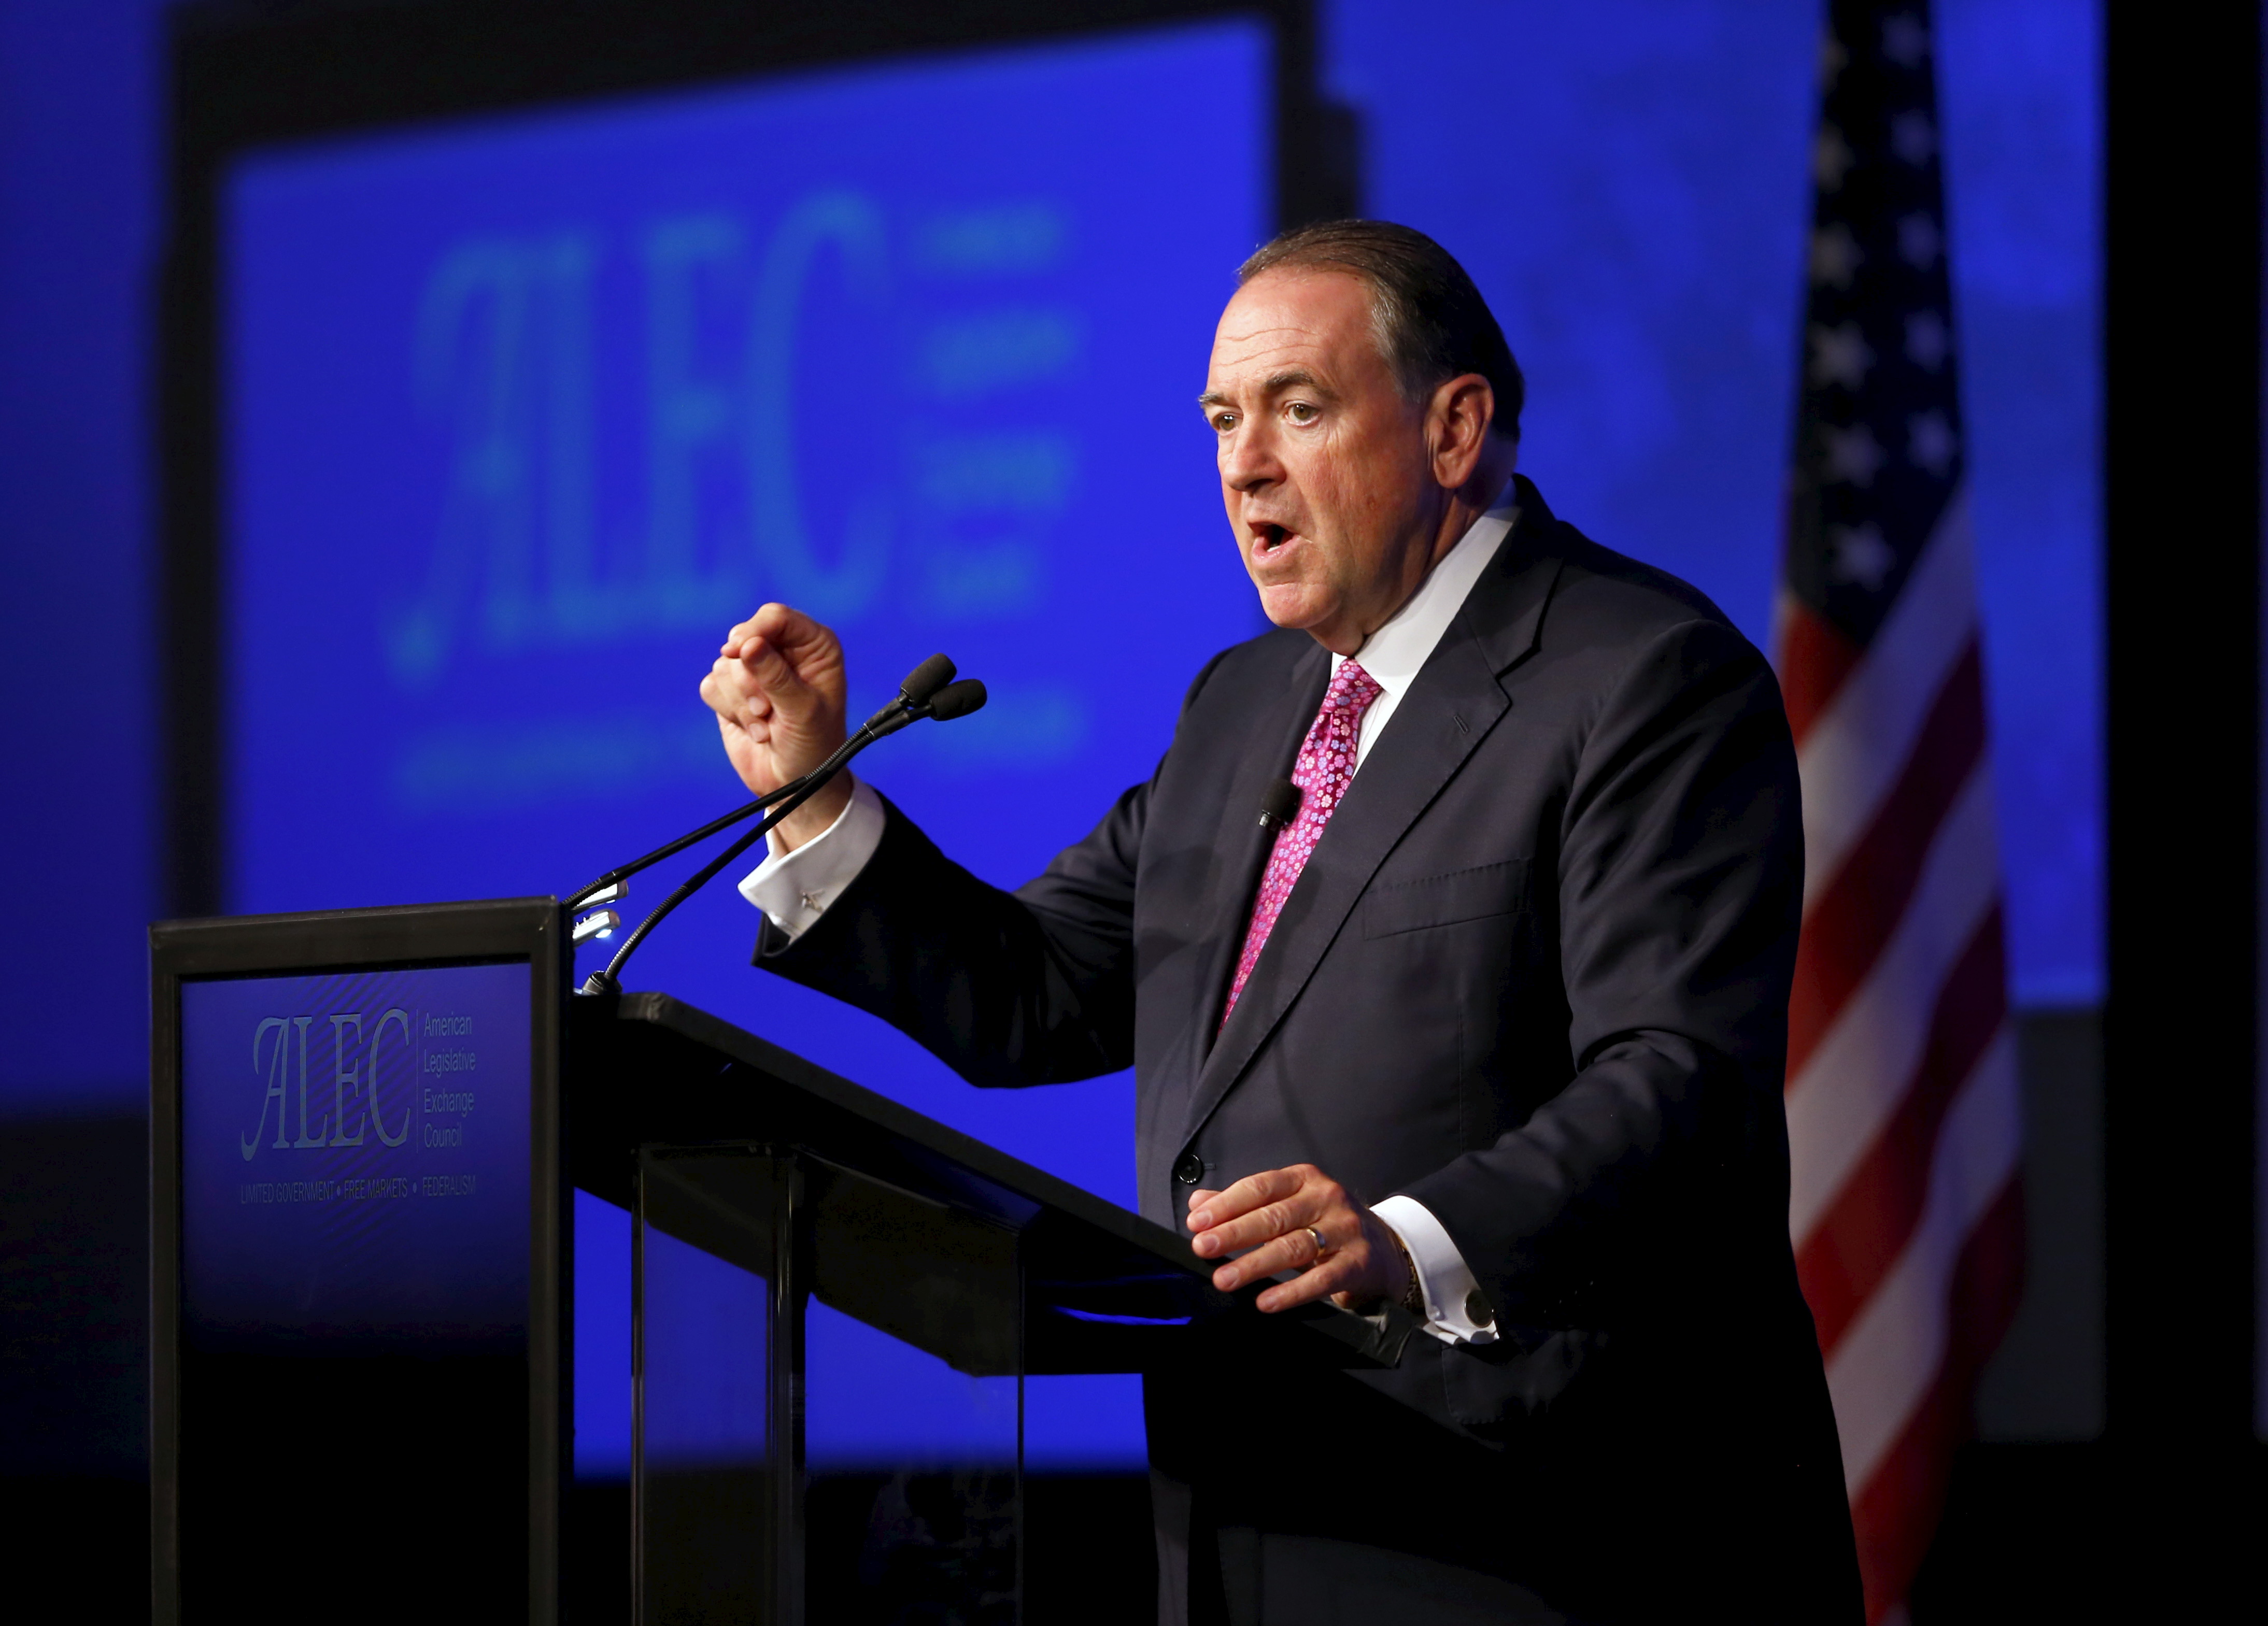 U.S. Republican presidential candidate Mike Huckabee speaks to the 42nd annual meeting of the American Legislative Exchange Council on July 23, 2015 (Mike Blake—Reuters)